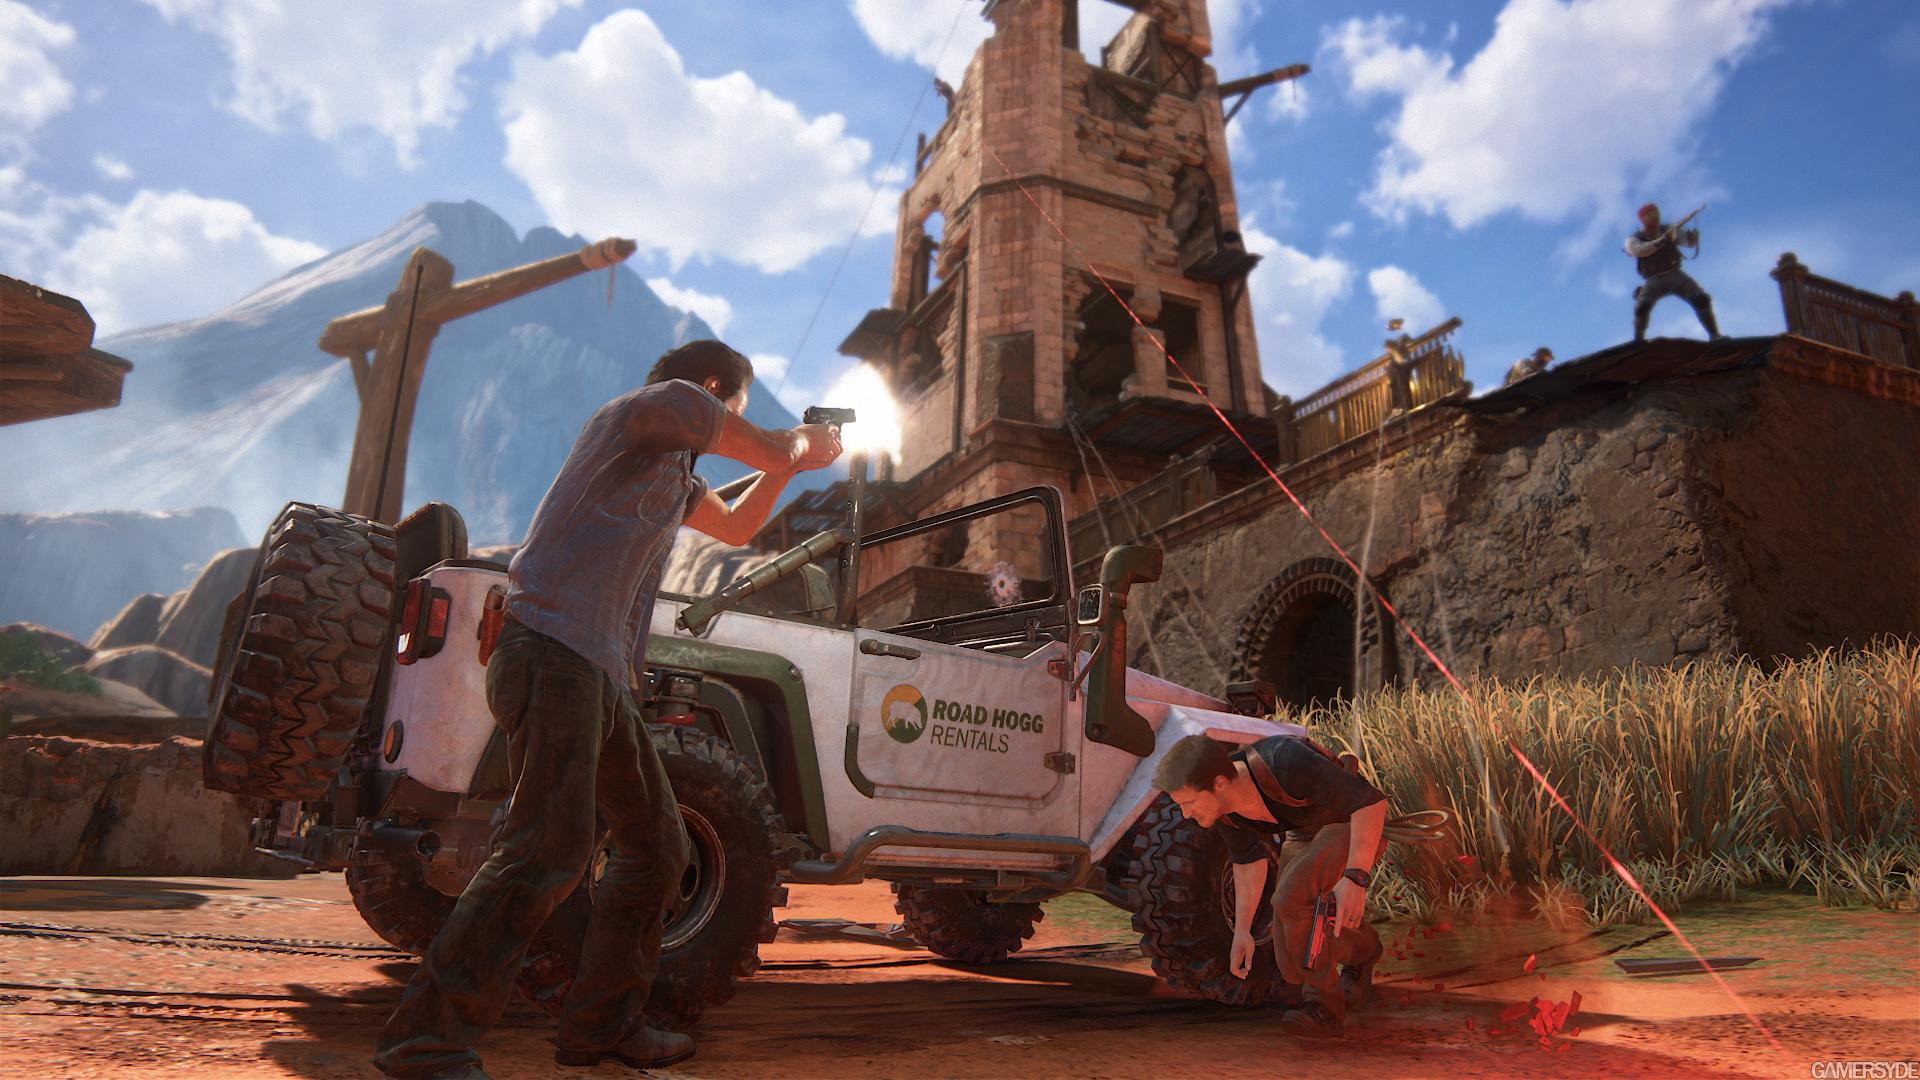 [Imagen: image_uncharted_4_a_thief_s_end-31382-2995_0008.jpg]